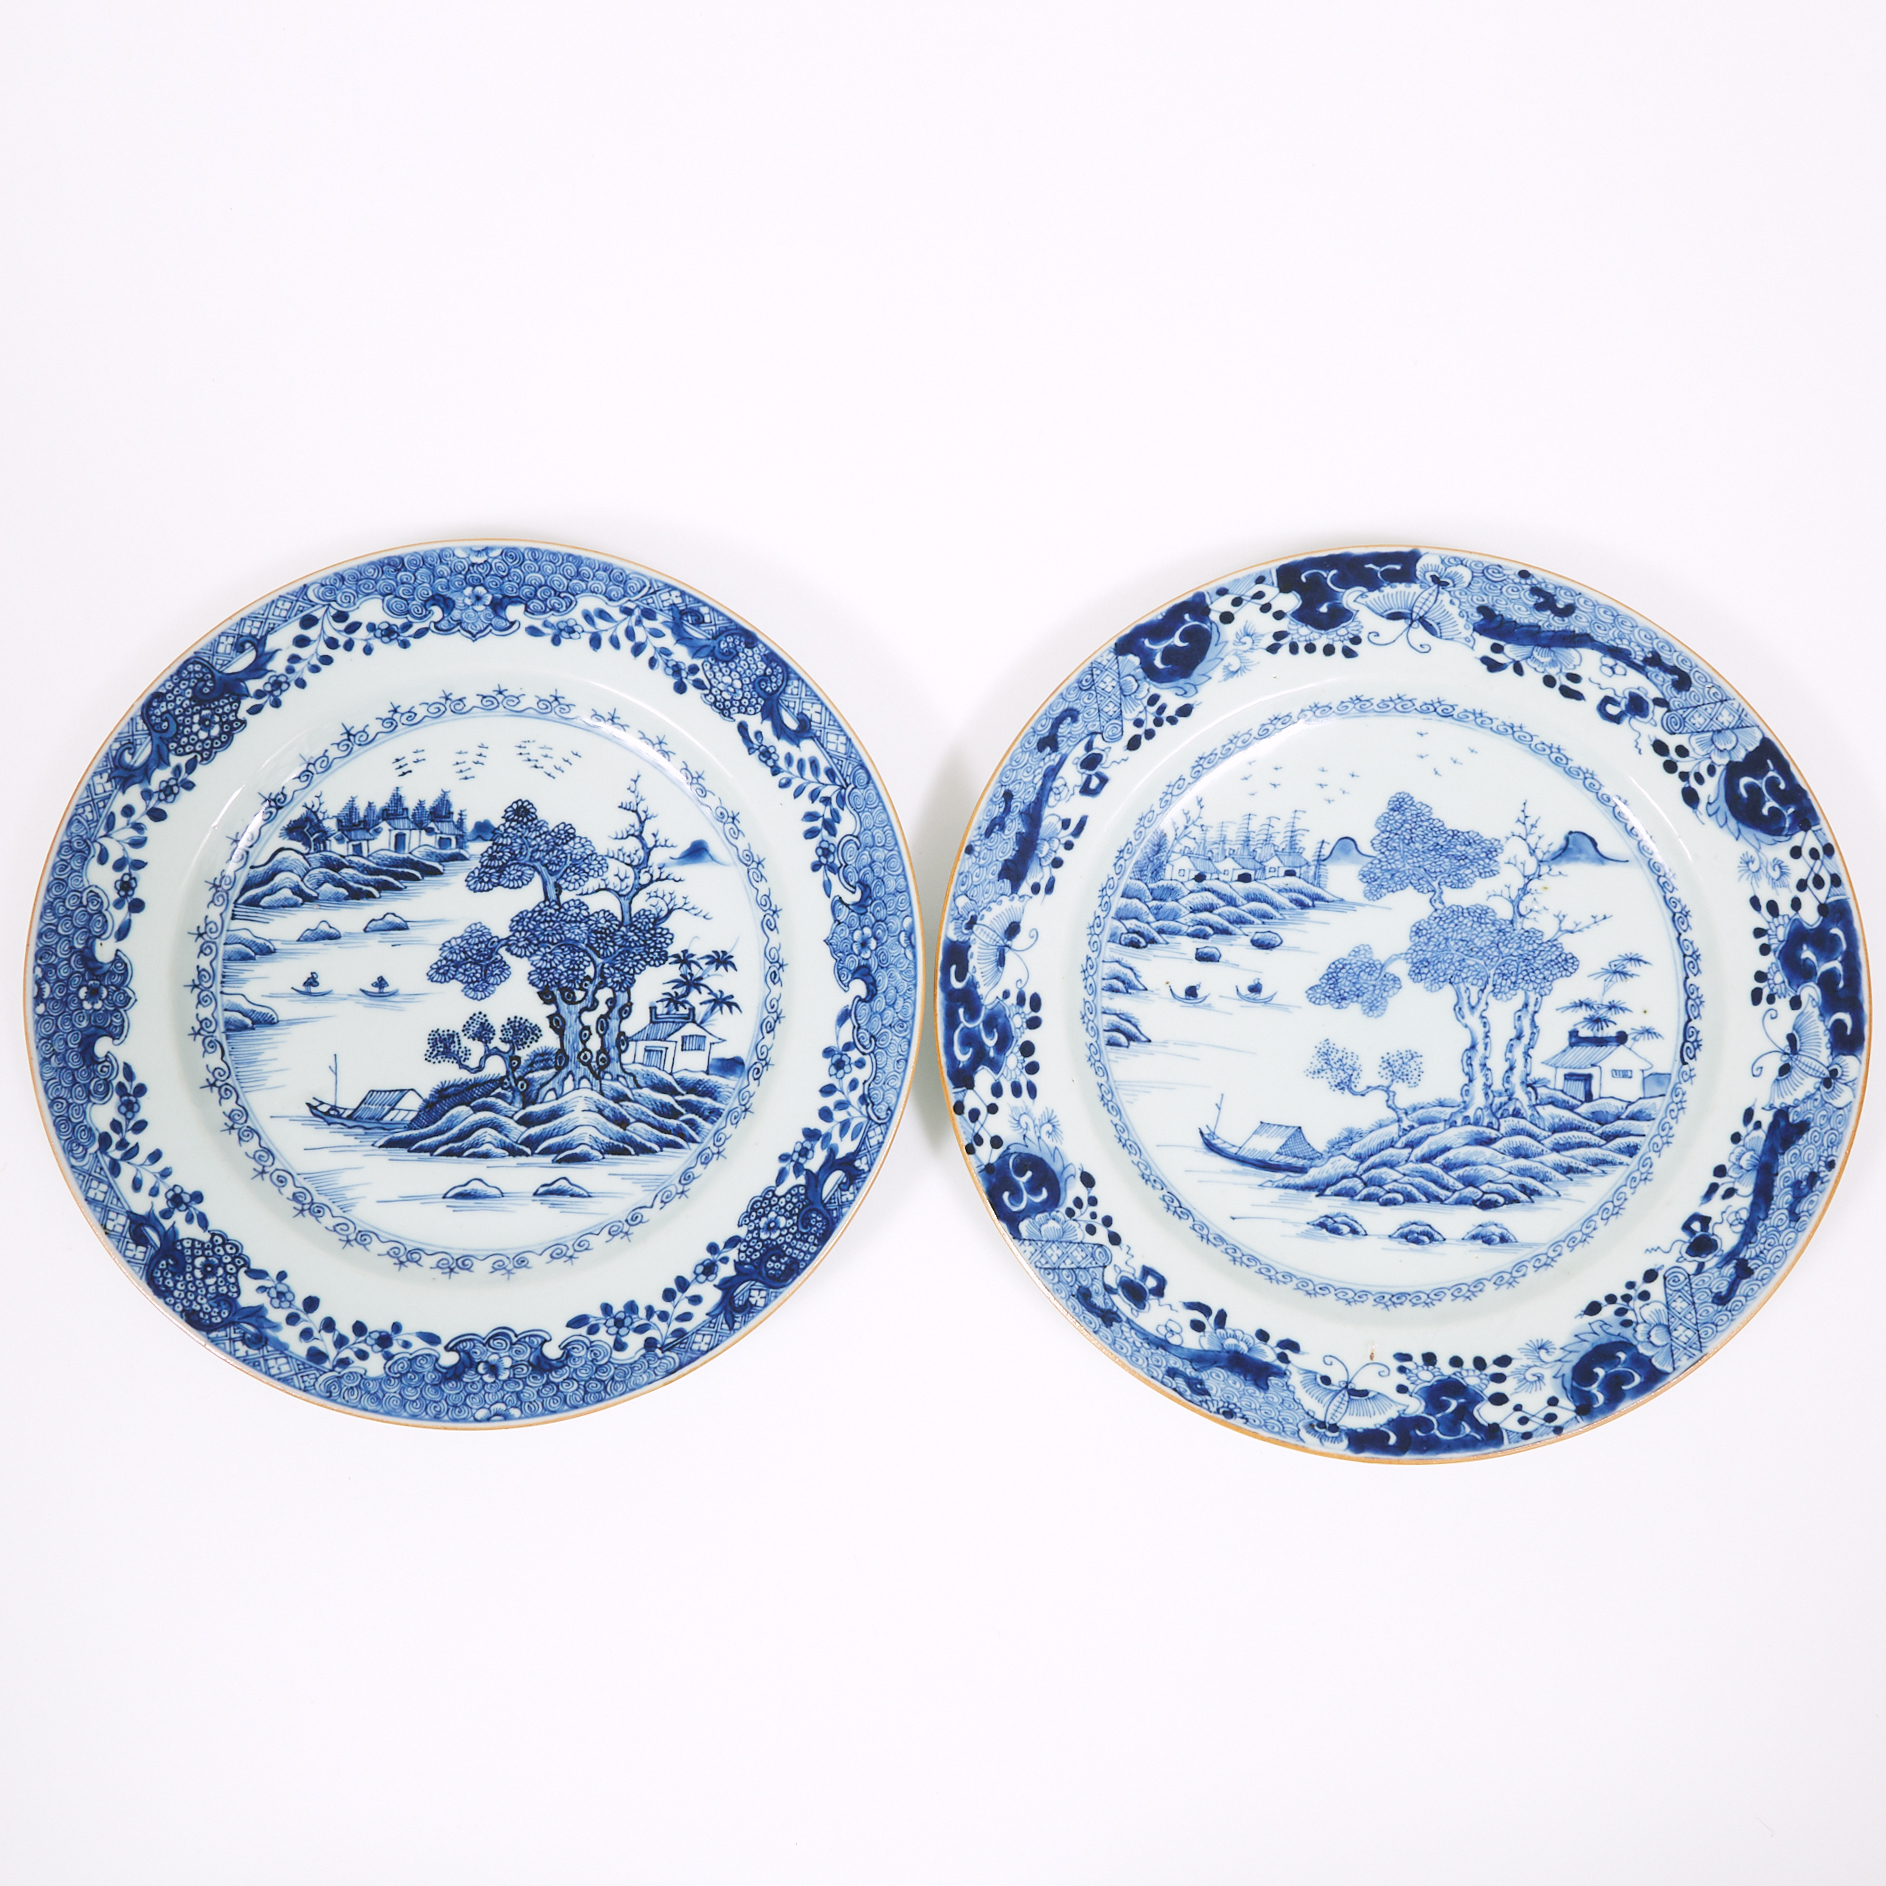 A Pair of Well-Painted Blue and White 'Landscape' Plates, 18th Century